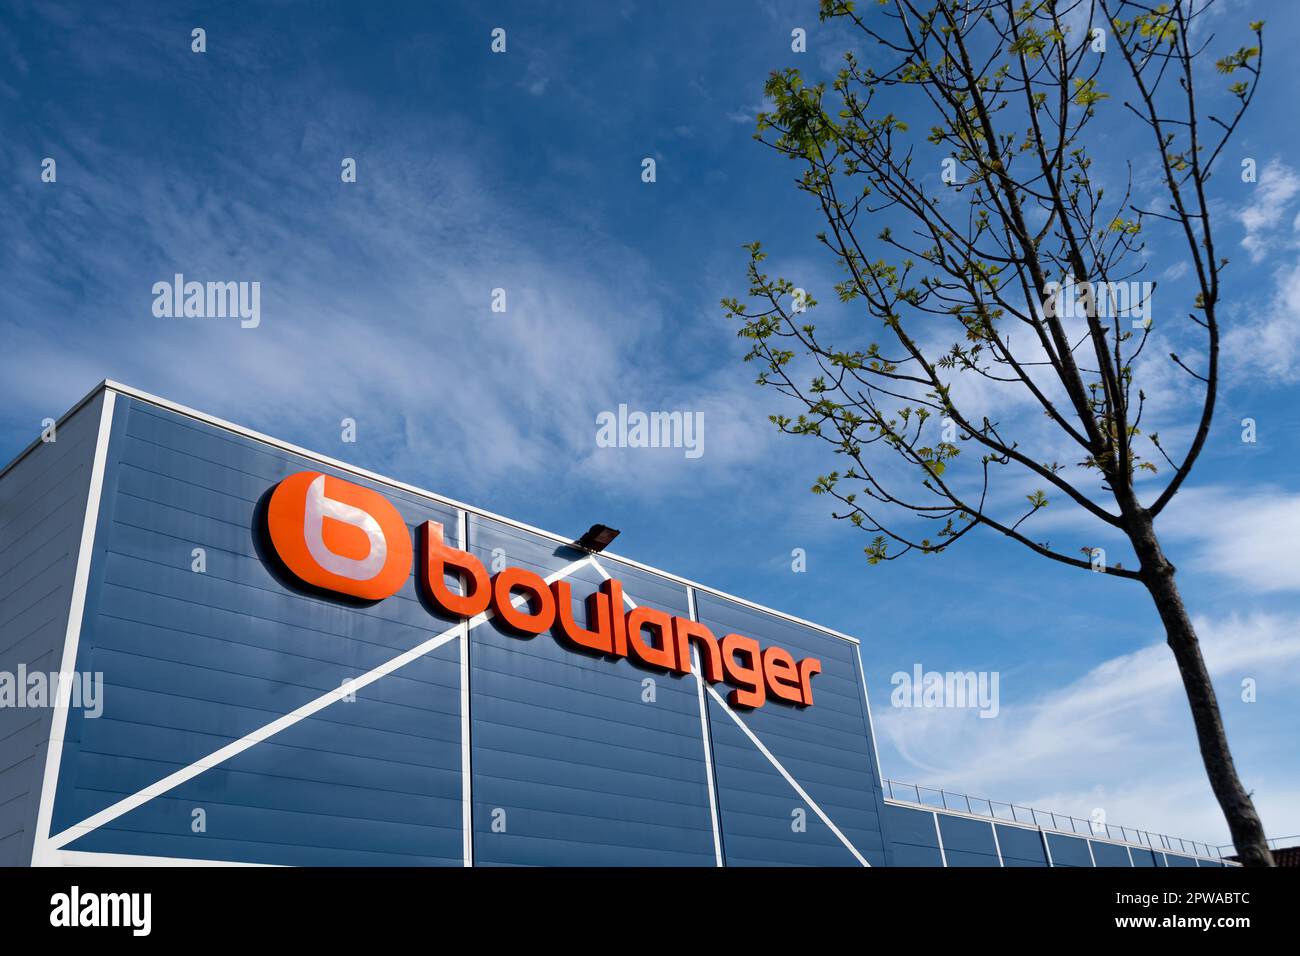 Exterior view of a Boulanger store, a French retail company specializing in computers, consumer electronics equipment and household appliances Stock Photo